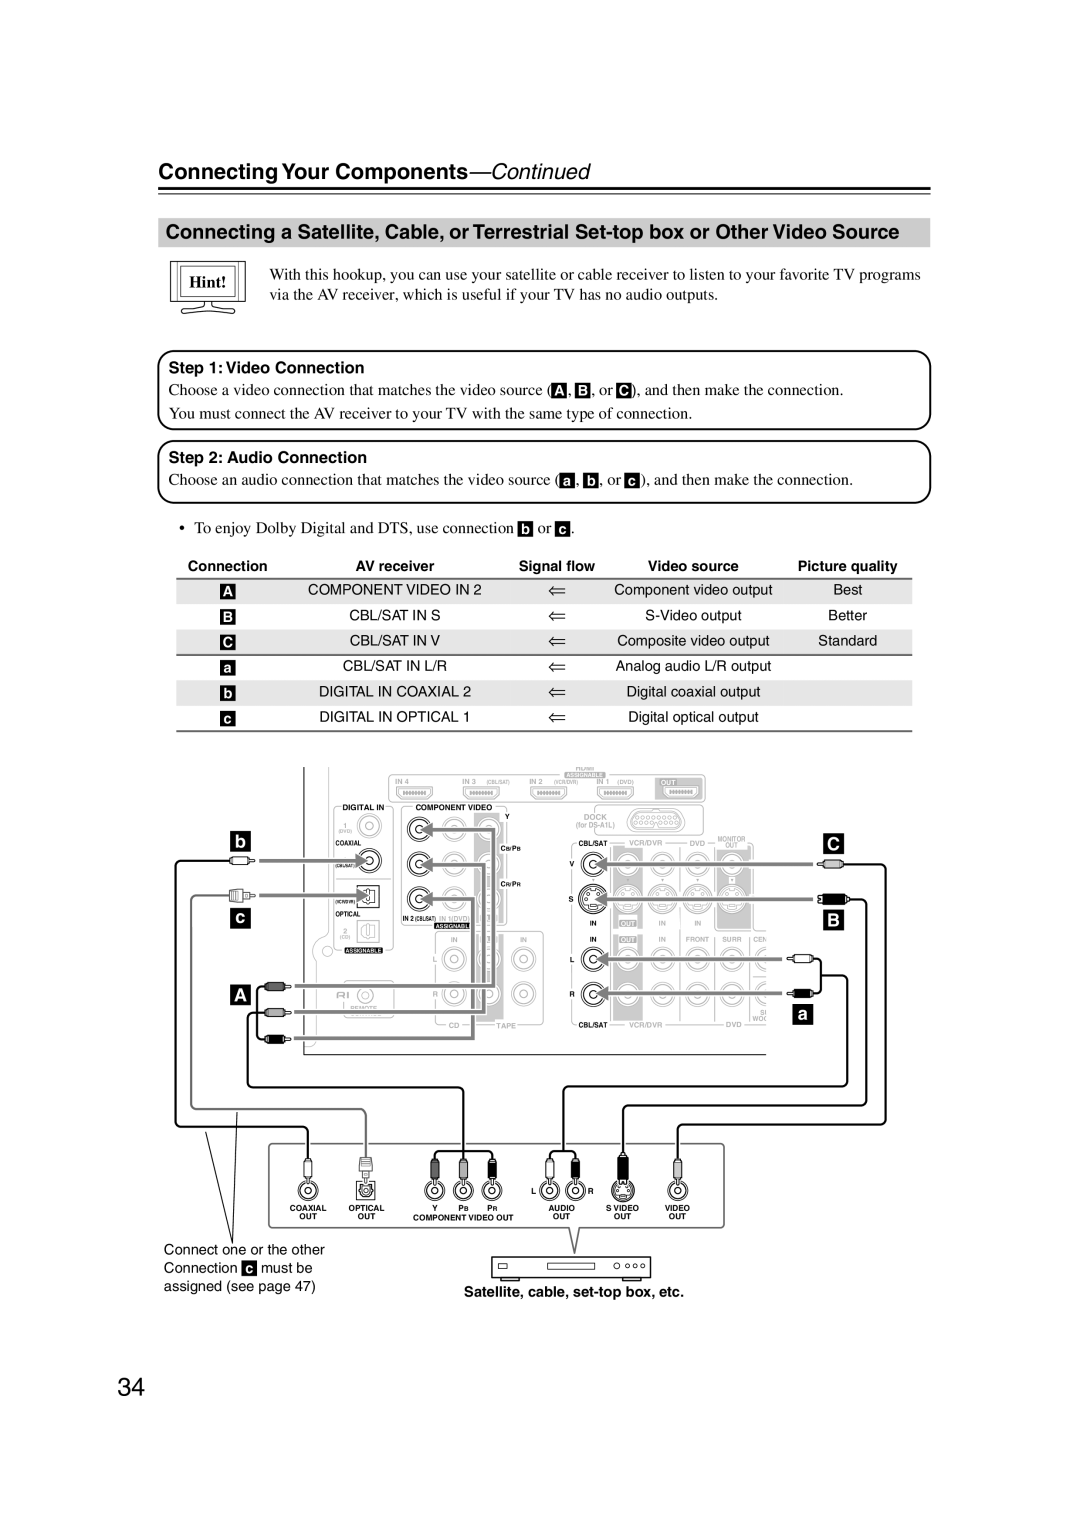 Onkyo HT-S6100 instruction manual b c A, Connecting Your Components-Continued, Hint 